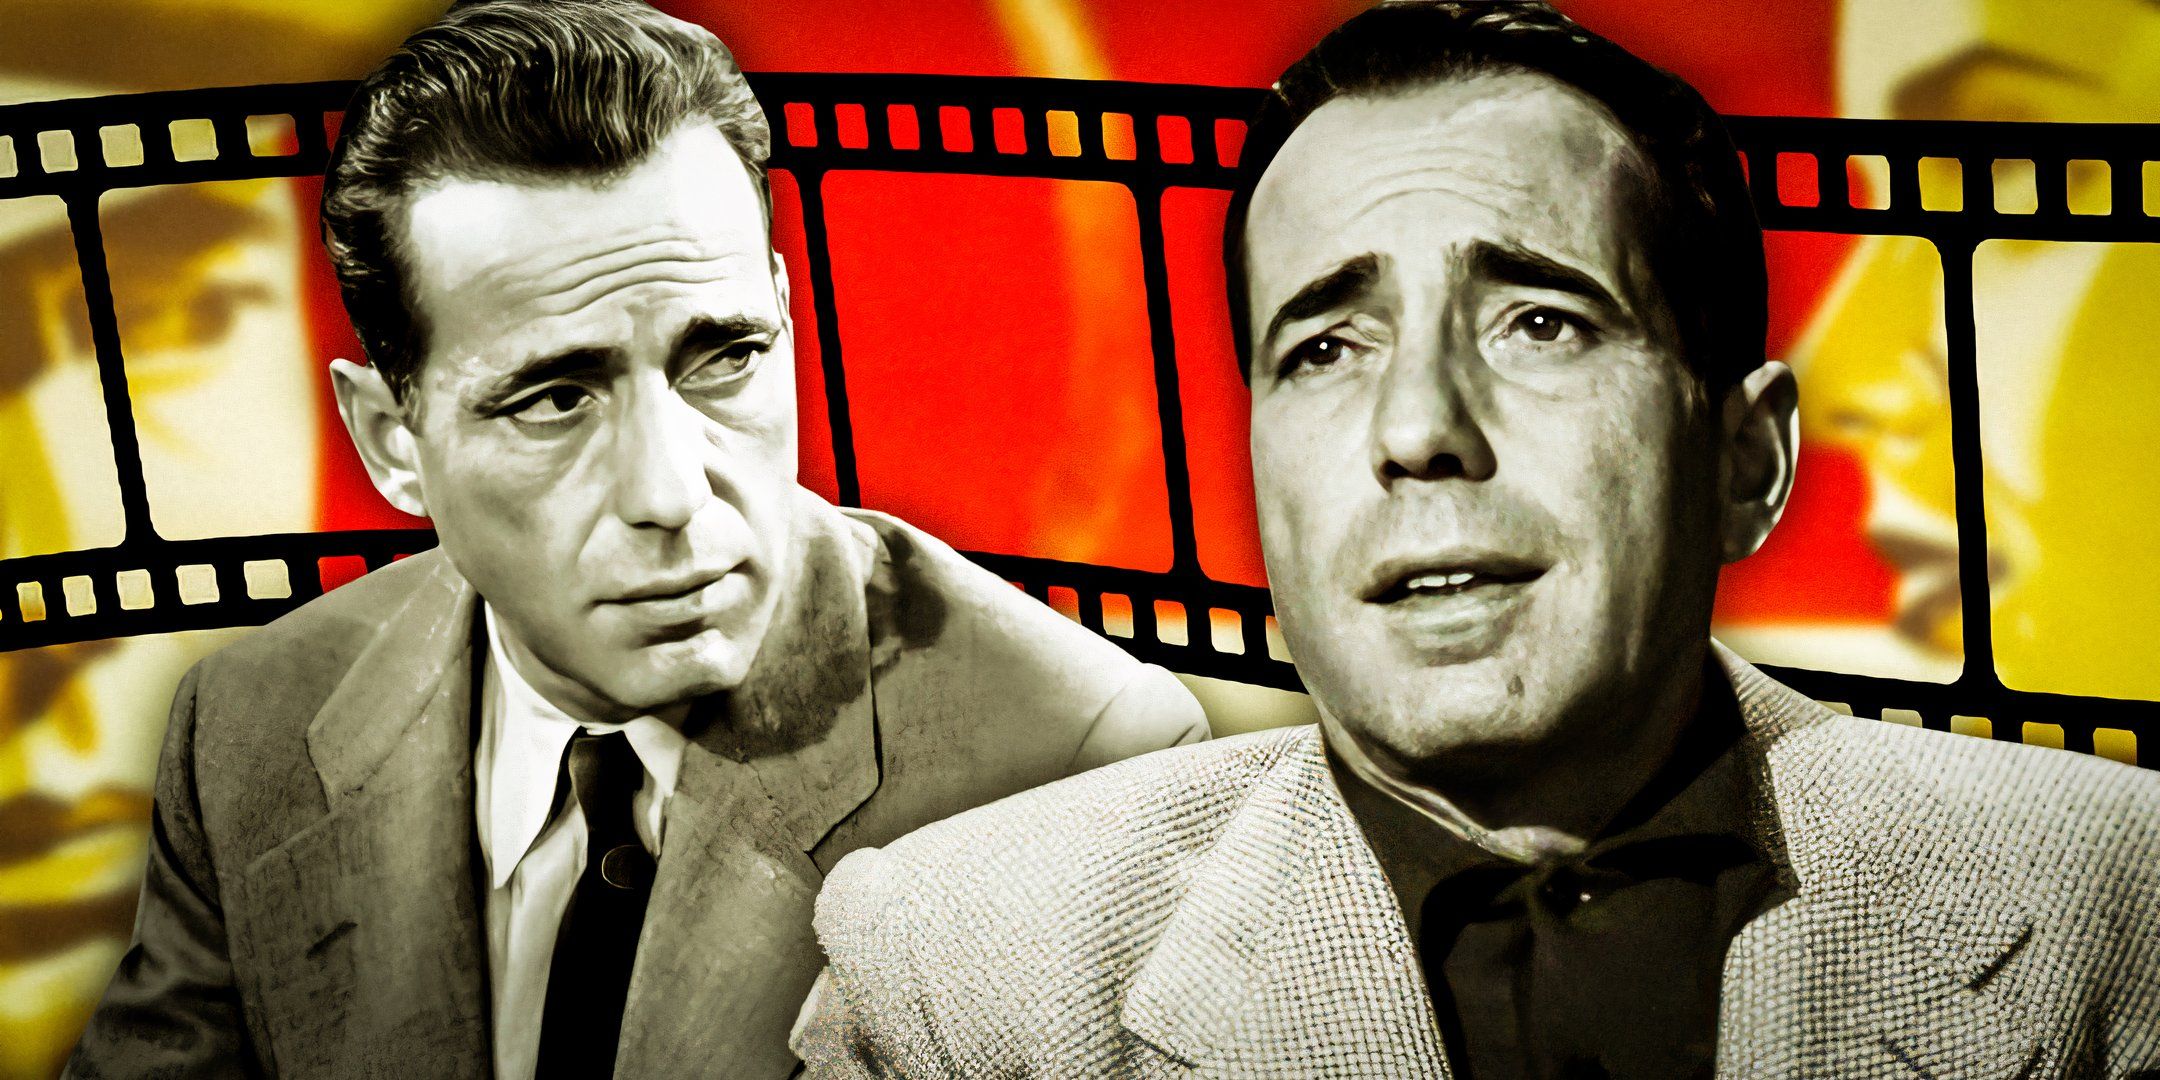 (Humphrey-Bogart-as-Philip-Marlowe)-from-The-Big-Sleep-and-(Humphrey-Bogart-as-Dixon-Steele)-from-In-a-Lonely-Place